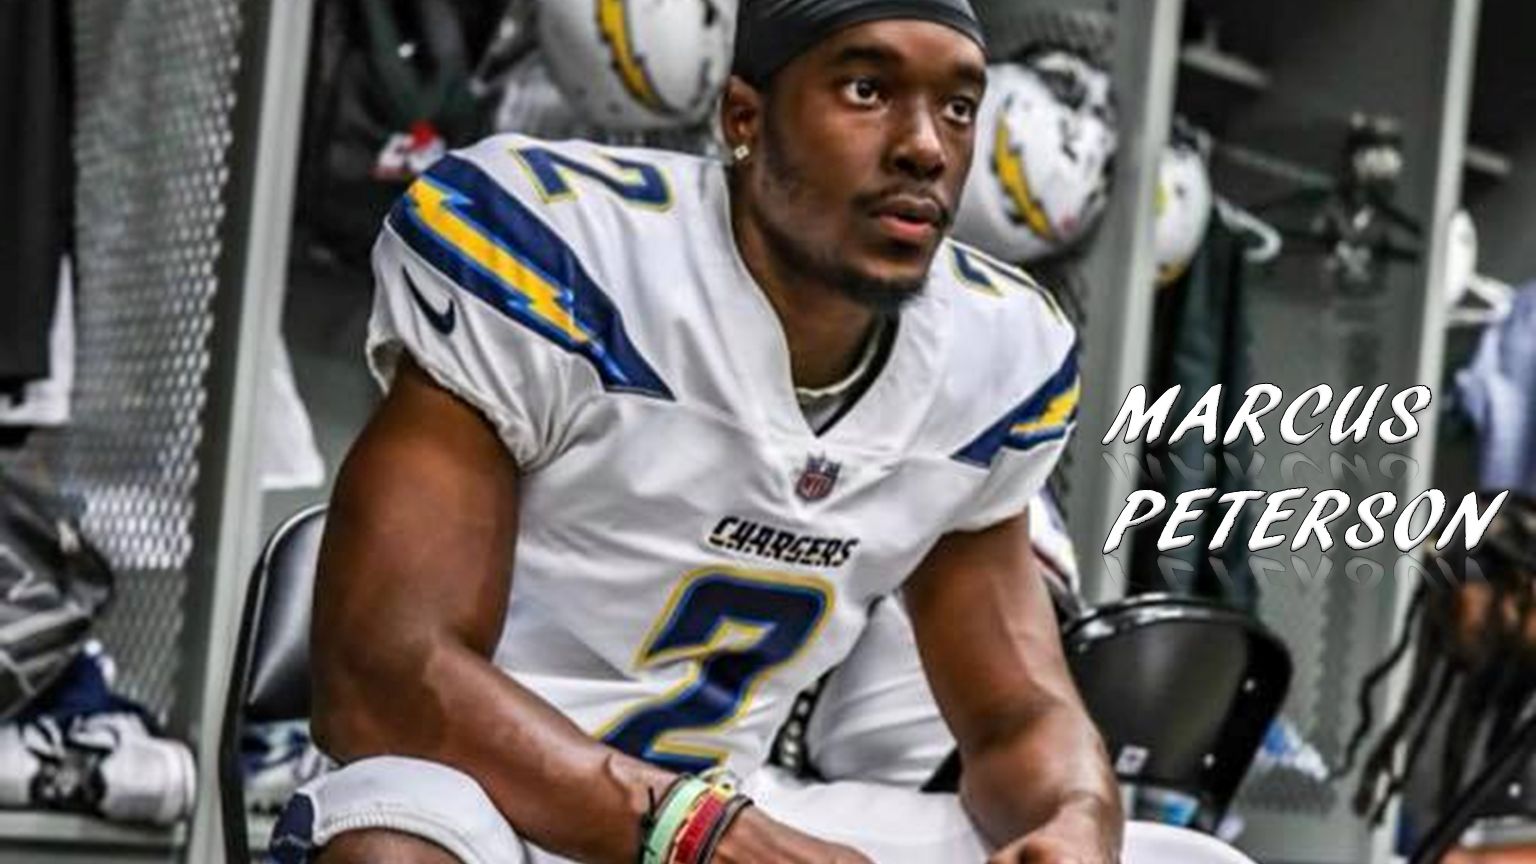 Marcus Peterson  prove yourself right with the MP motivational